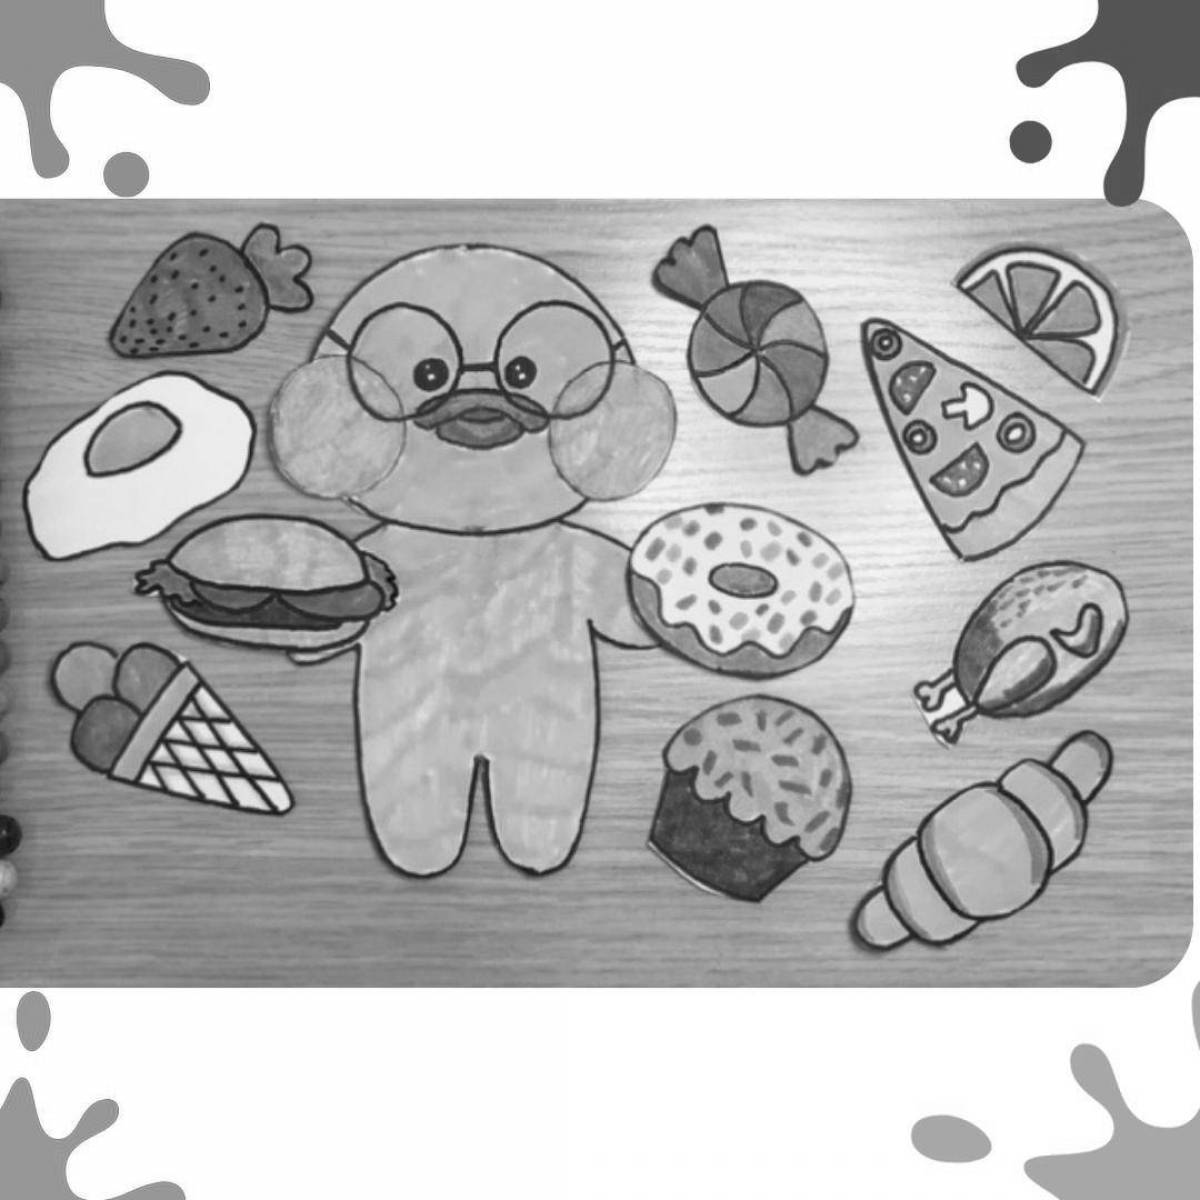 Lalafanfan's tempting food coloring page